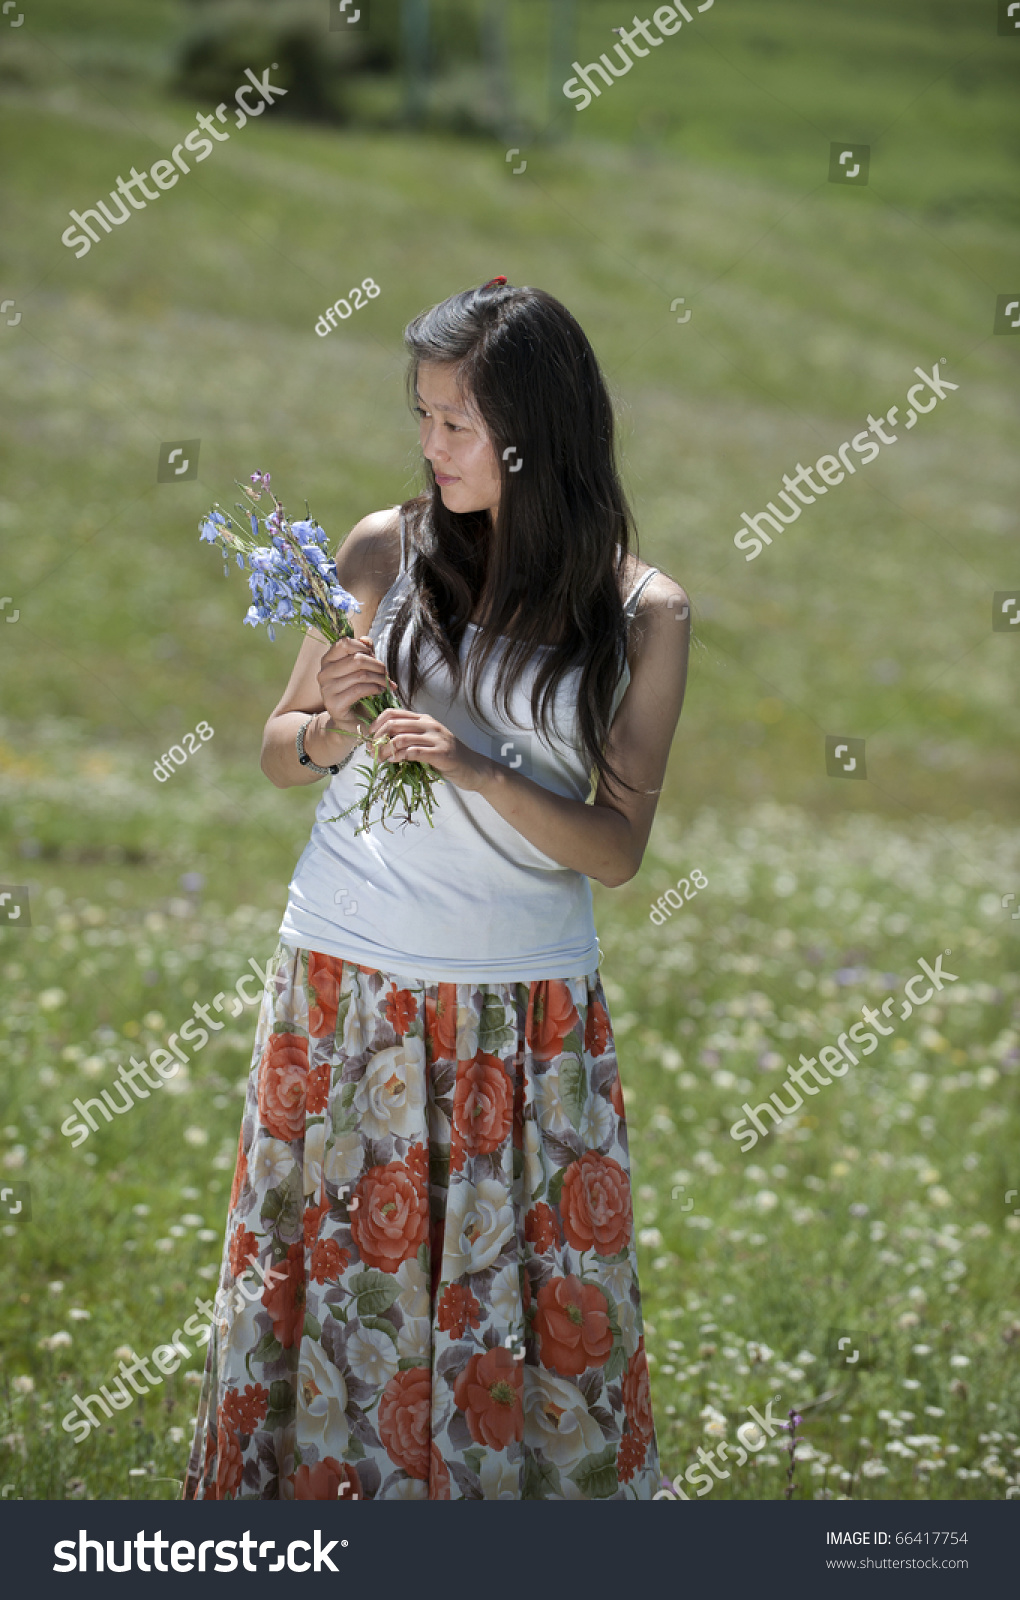 A Girl Gathering Flowers In The Grassland. Stock Photo 66417754 ...